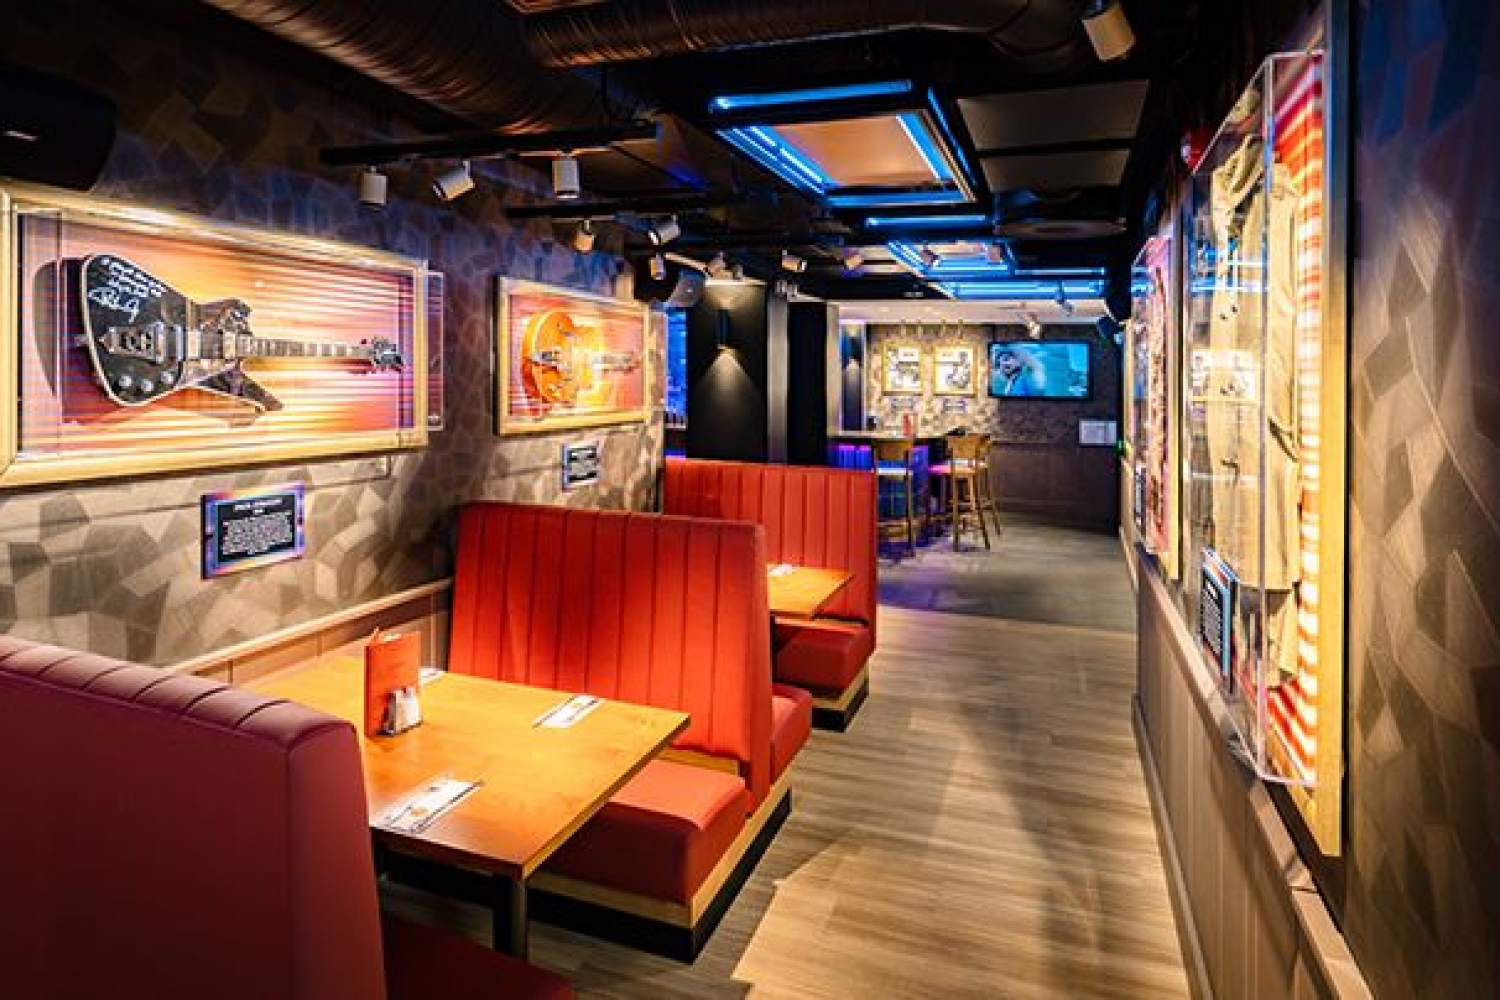 The inside of Hard Rock showing the seating arrangement